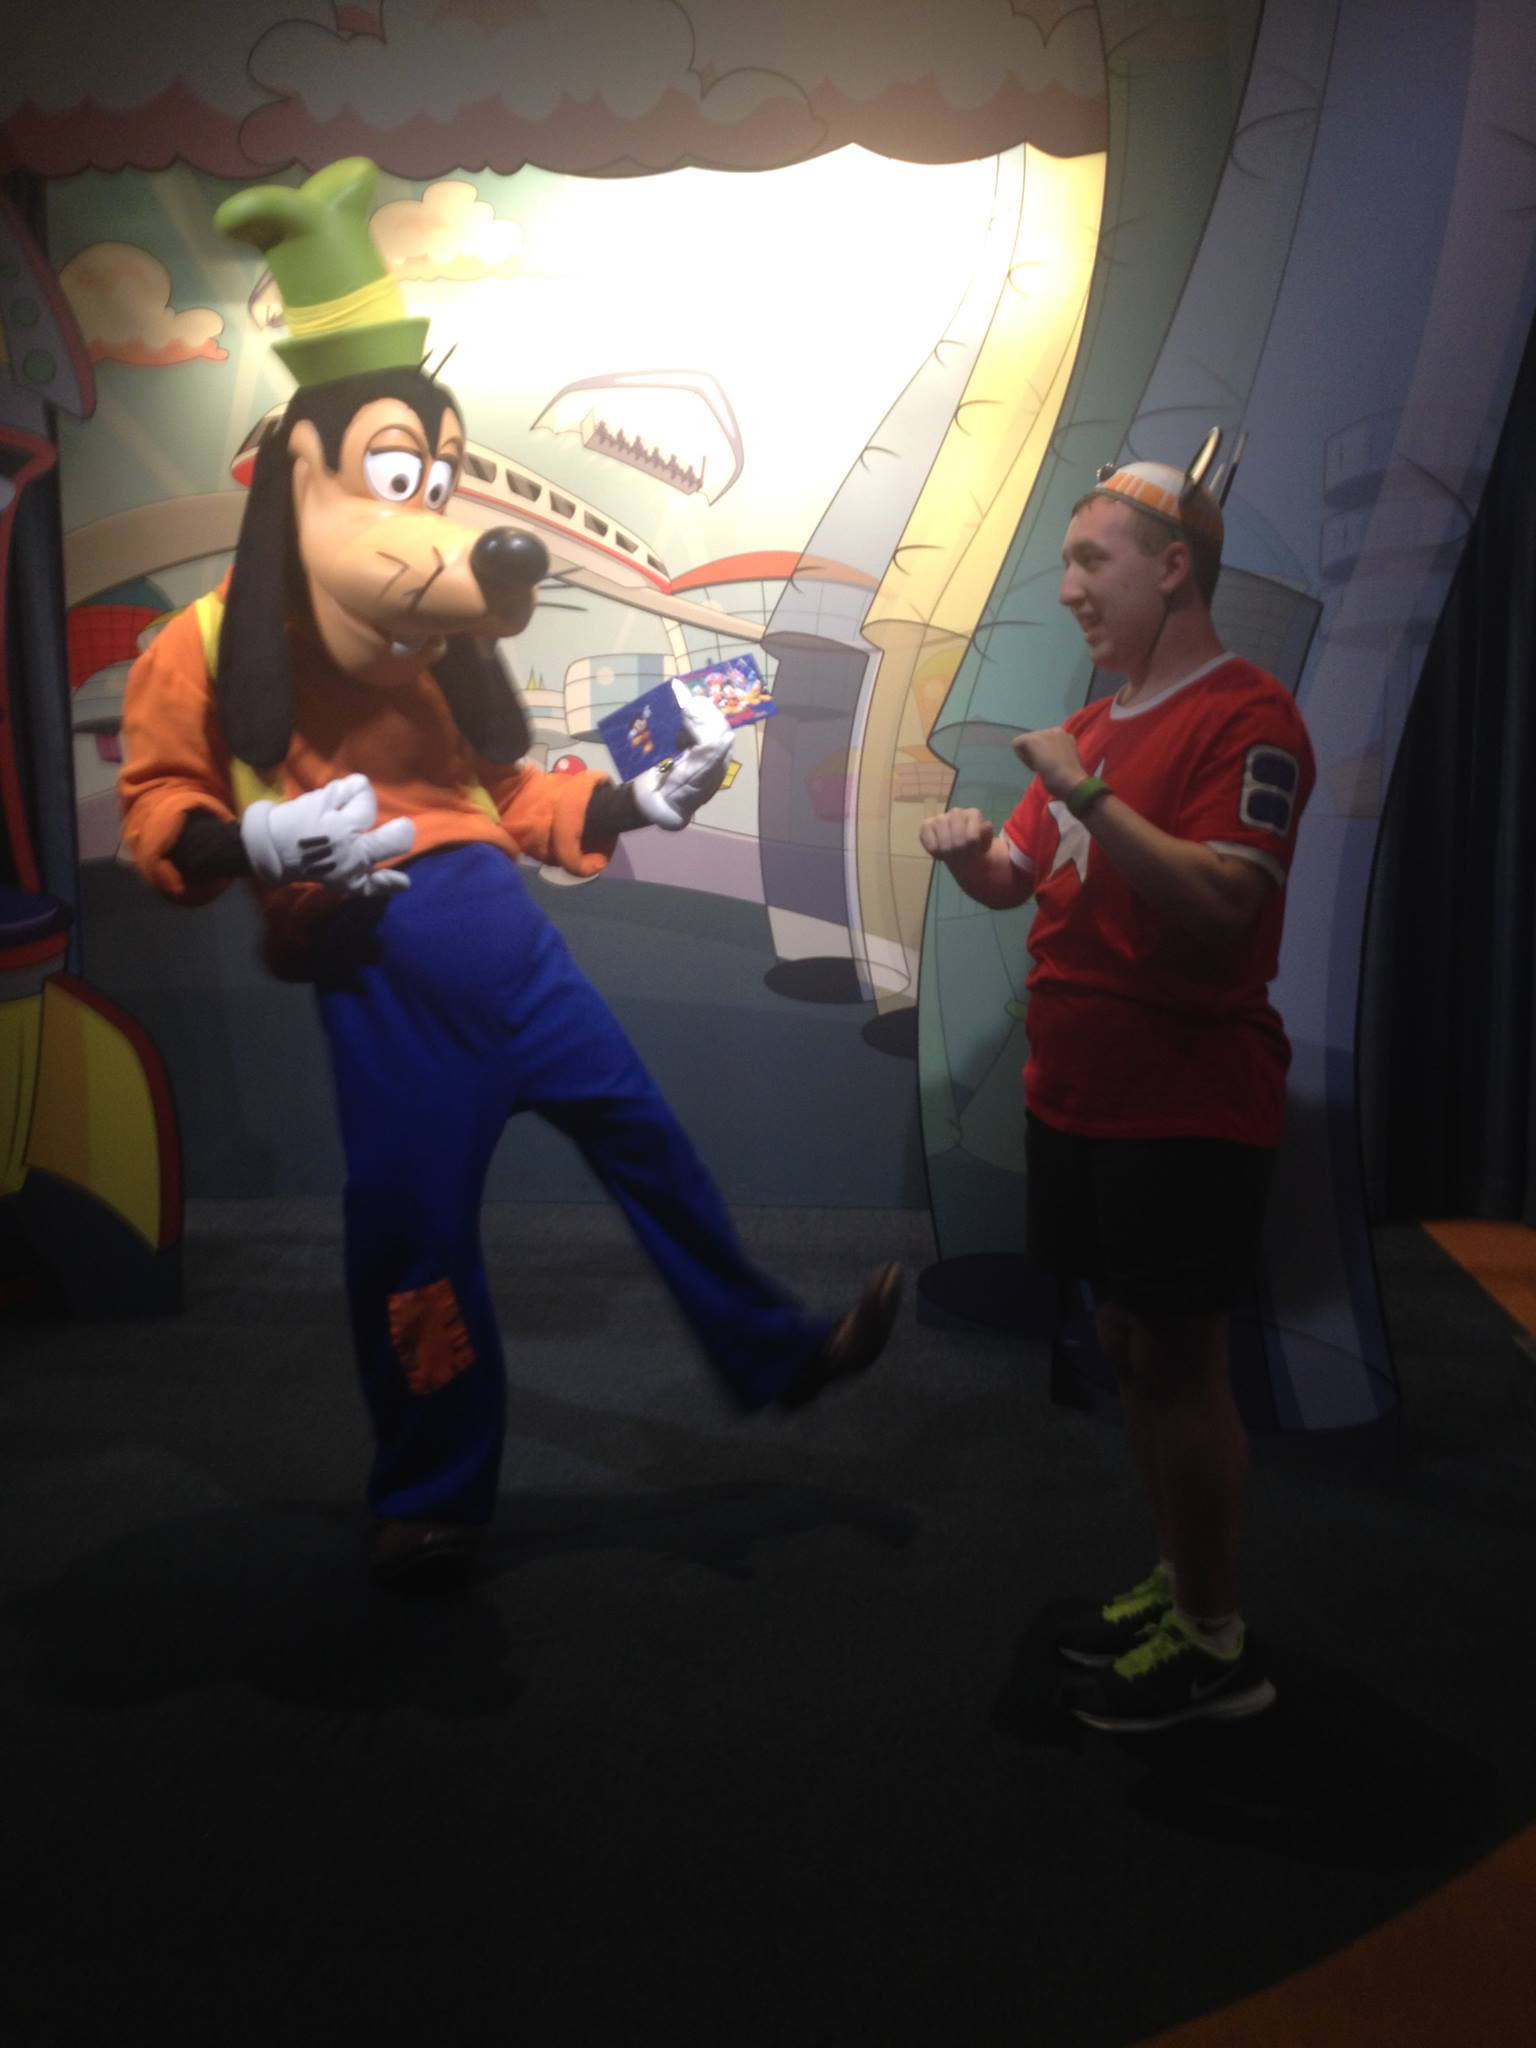 Rockin it out like Goofy's son Max